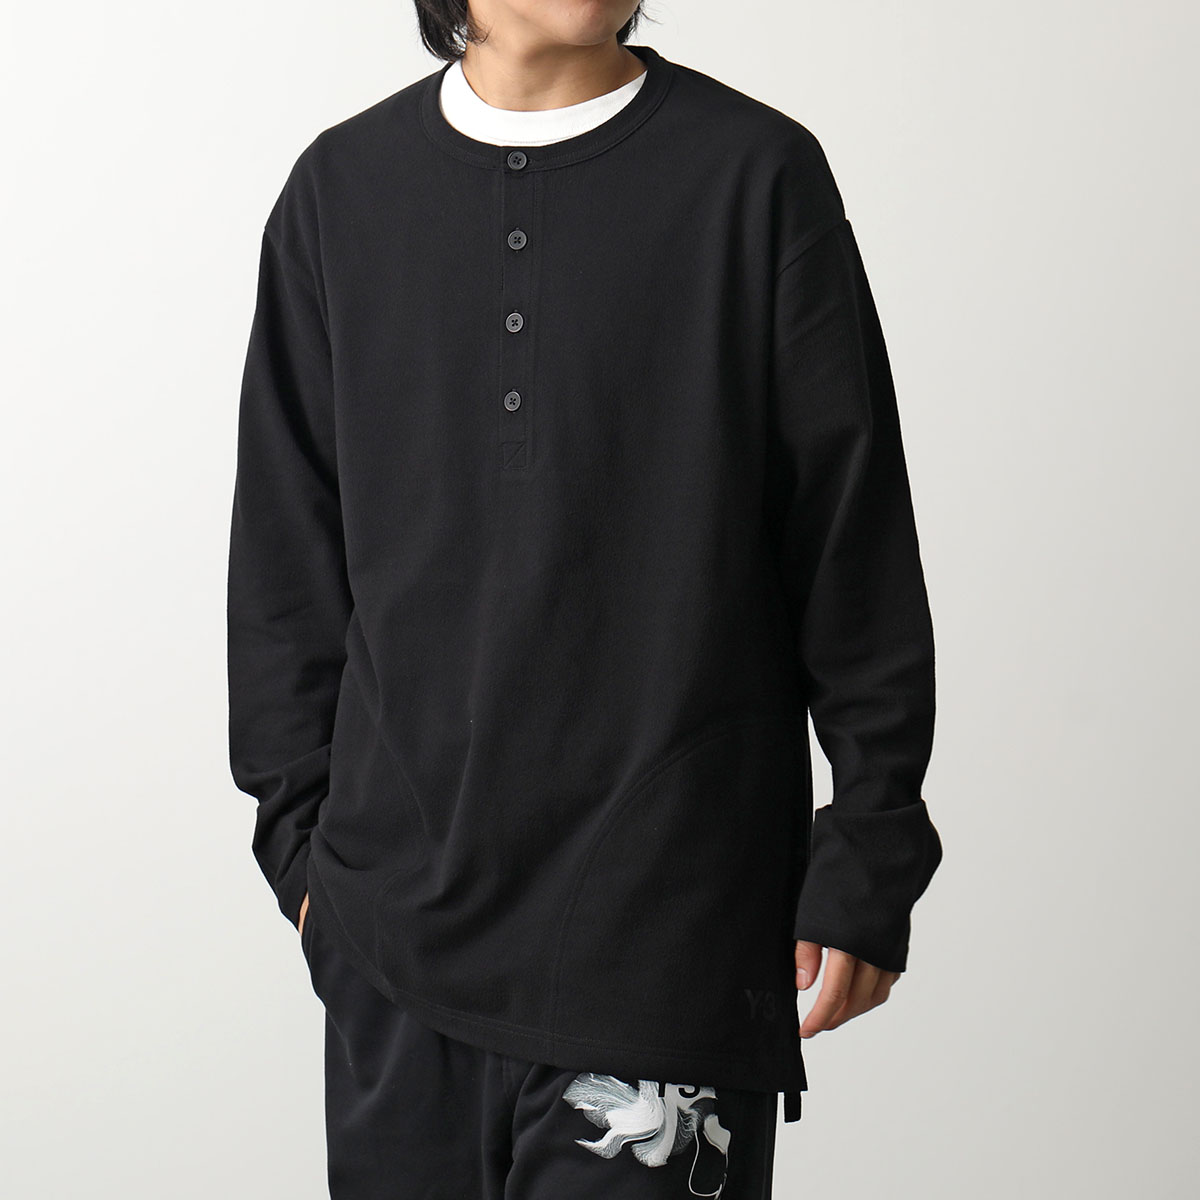 Y-3 ワイスリー 長袖 Tシャツ WRKWR SS TEE IN8700 メンズ ロンT コットン ヘンリーネック BLACK｜s-musee｜02